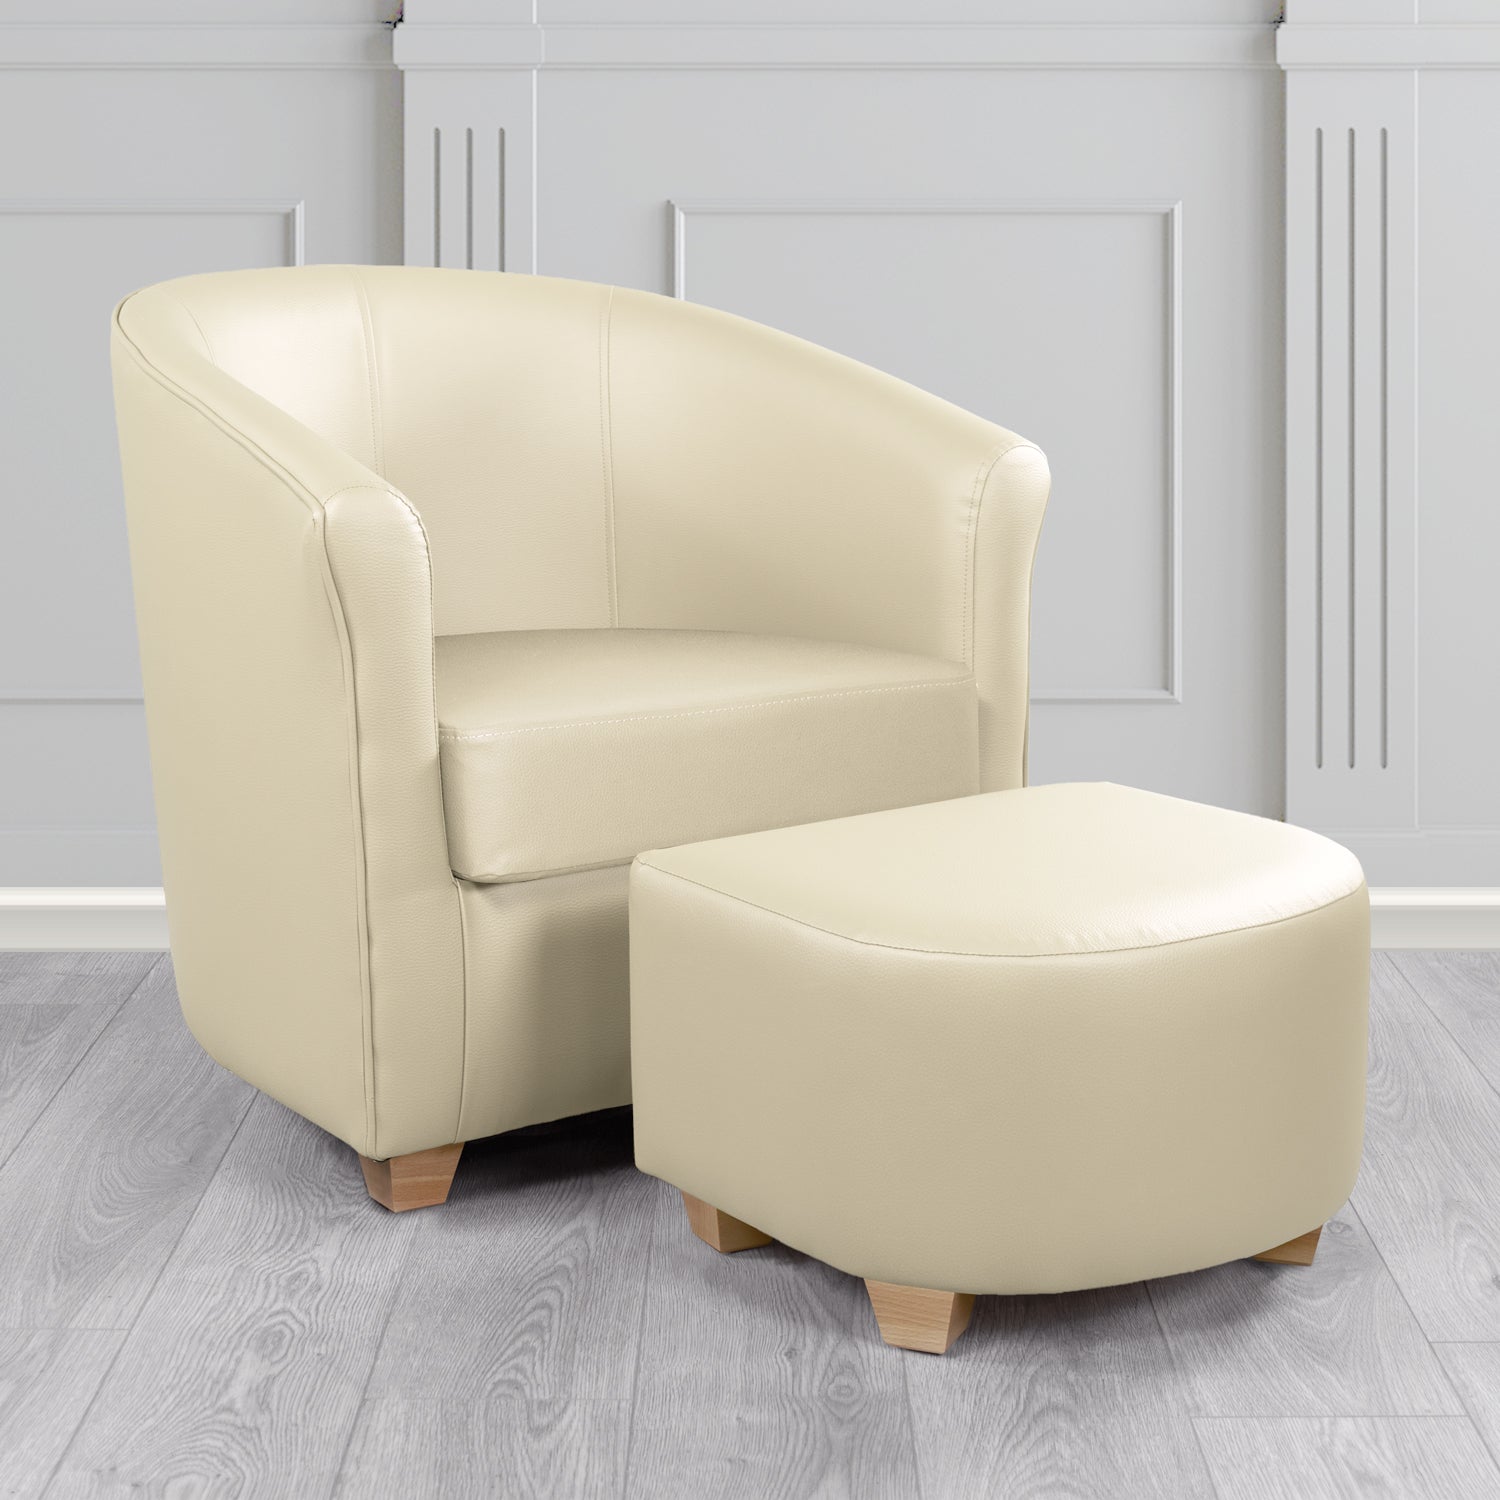 Cannes Tub Chair with Footstool Set in Madrid Cream Faux Leather - The Tub Chair Shop